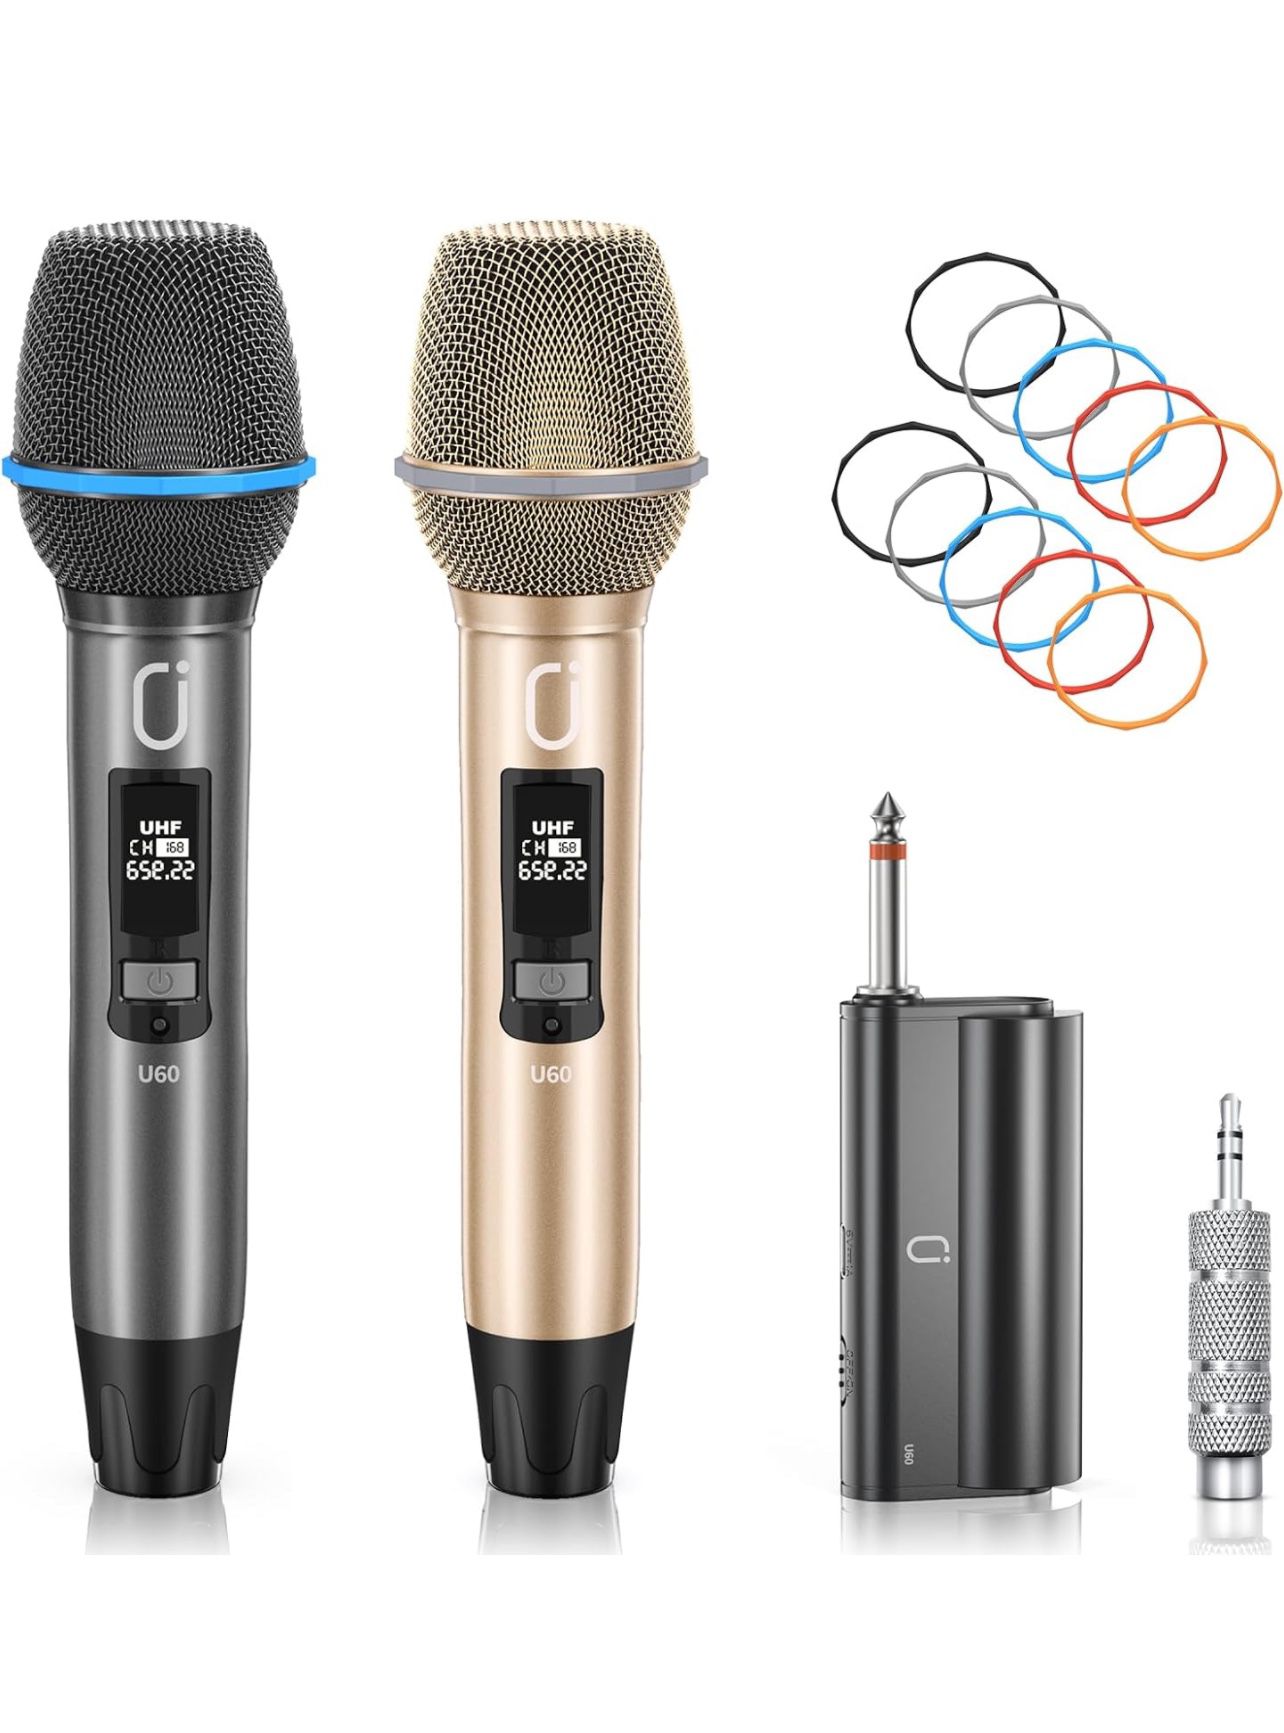 U60 Wireless Microphones, Dual UHF Microphone System with Rechargeable Receiver, Metal Karaoke Microphone for Singing, Wedding, DJ, Party, Speech, Chu